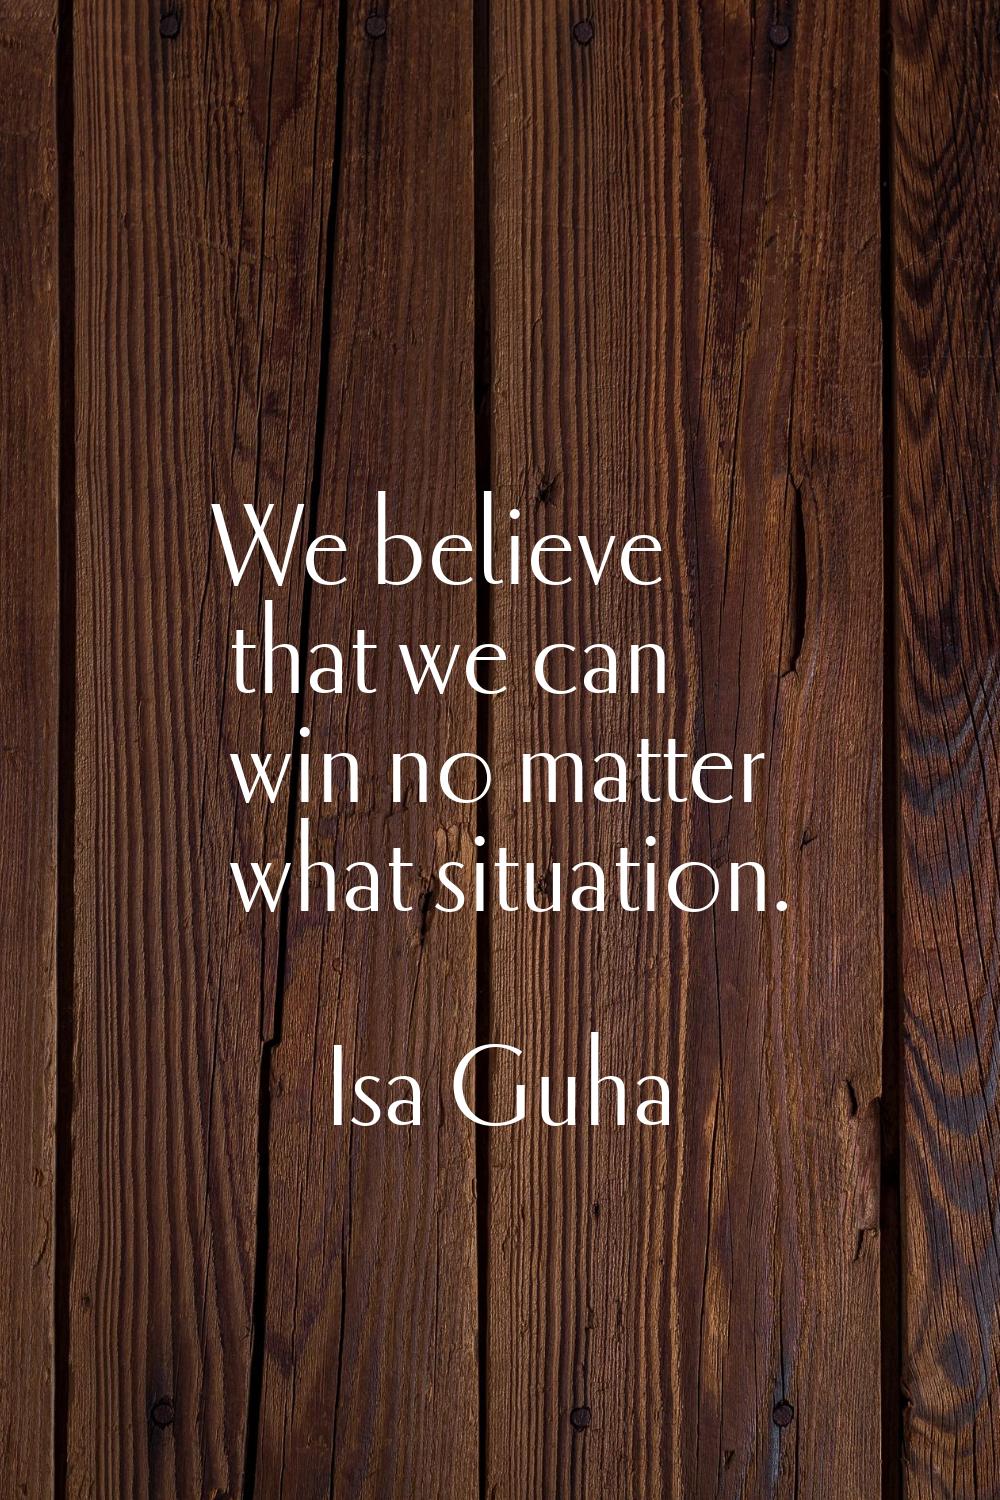 We believe that we can win no matter what situation.